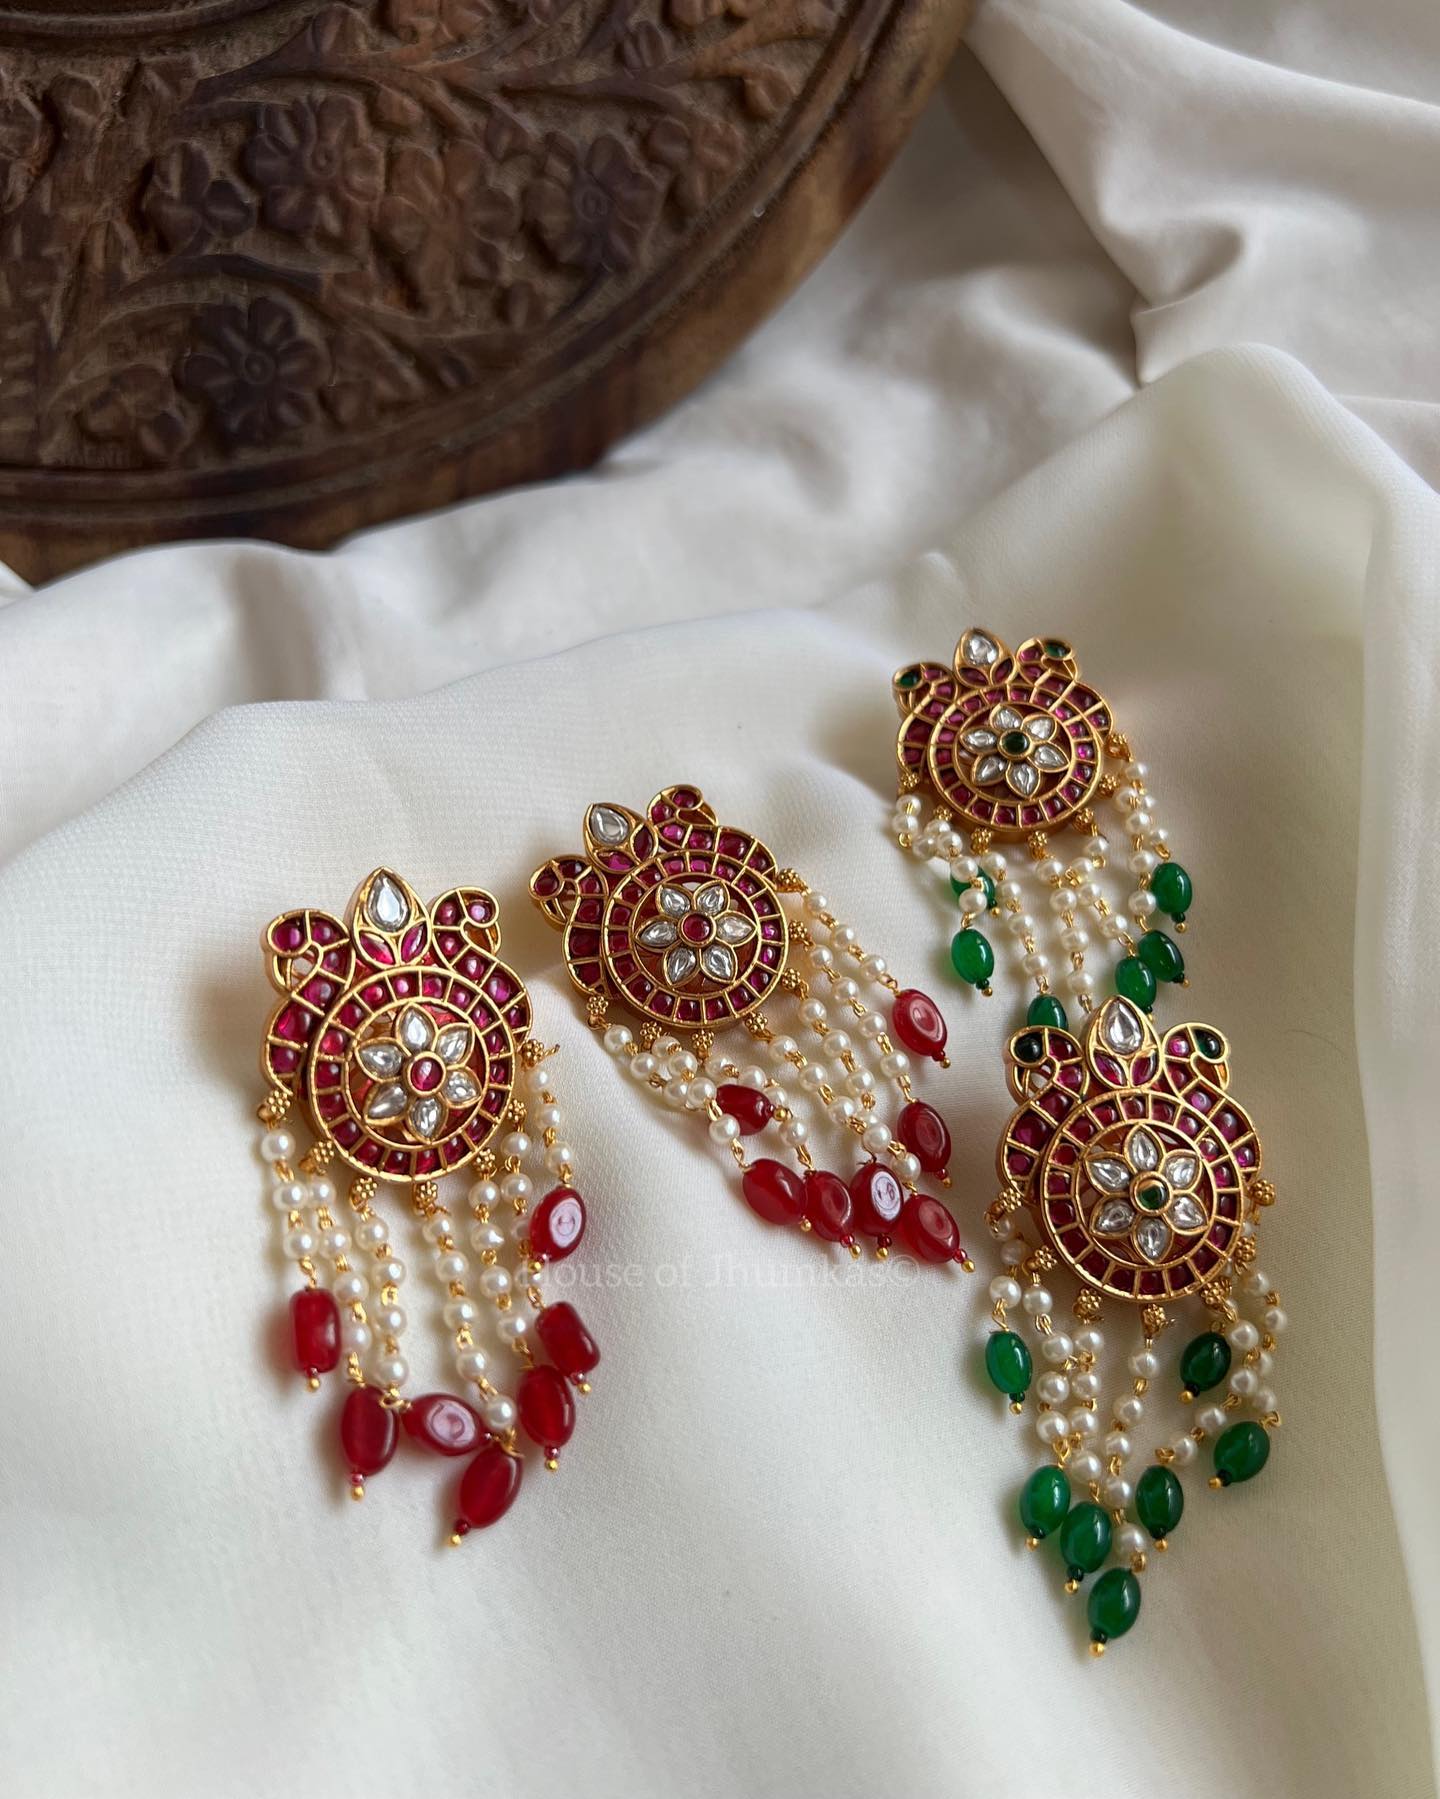 House of jhumkas review